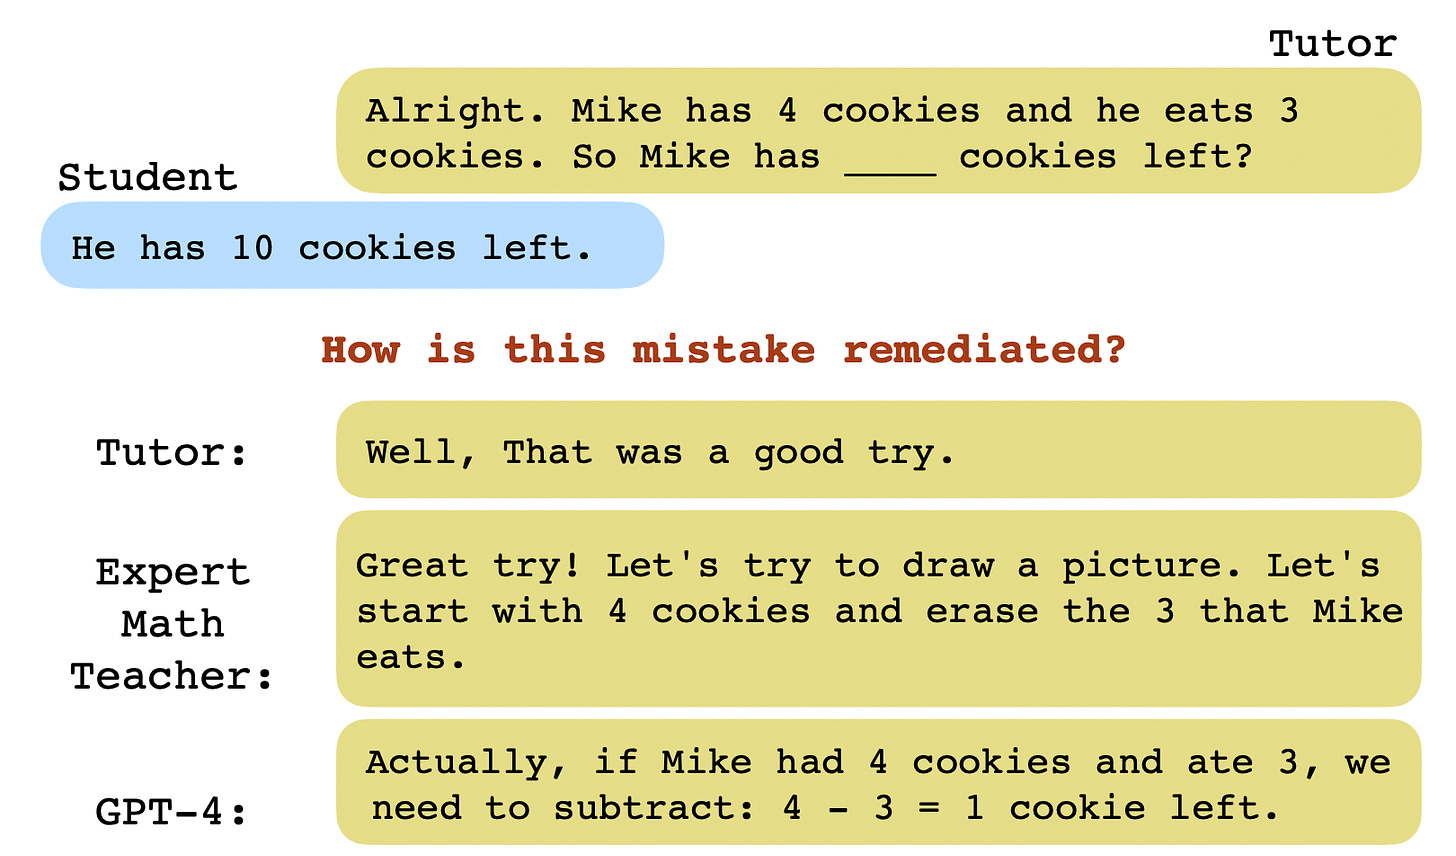 A chat transcript between a tutor and a student. The Tutor says "Alright. Mike has 4 cookies and he eats 3 cookies. So Mike has ___ cookies left?" The student says "He has 10 cookies left." The image asks "How is this mistake remediated?" Three options follow. A tutor says, "Well that was a good try." An expert math teacher says, "Great try! Let's try to draw a picture. Let's start with 4 cookies and erase the 3 that Mike eats." GPT-4 says "Actually if Mike had 4 cookies and ate 3,w e need to subtract: 4-3 = 1 cookie left."